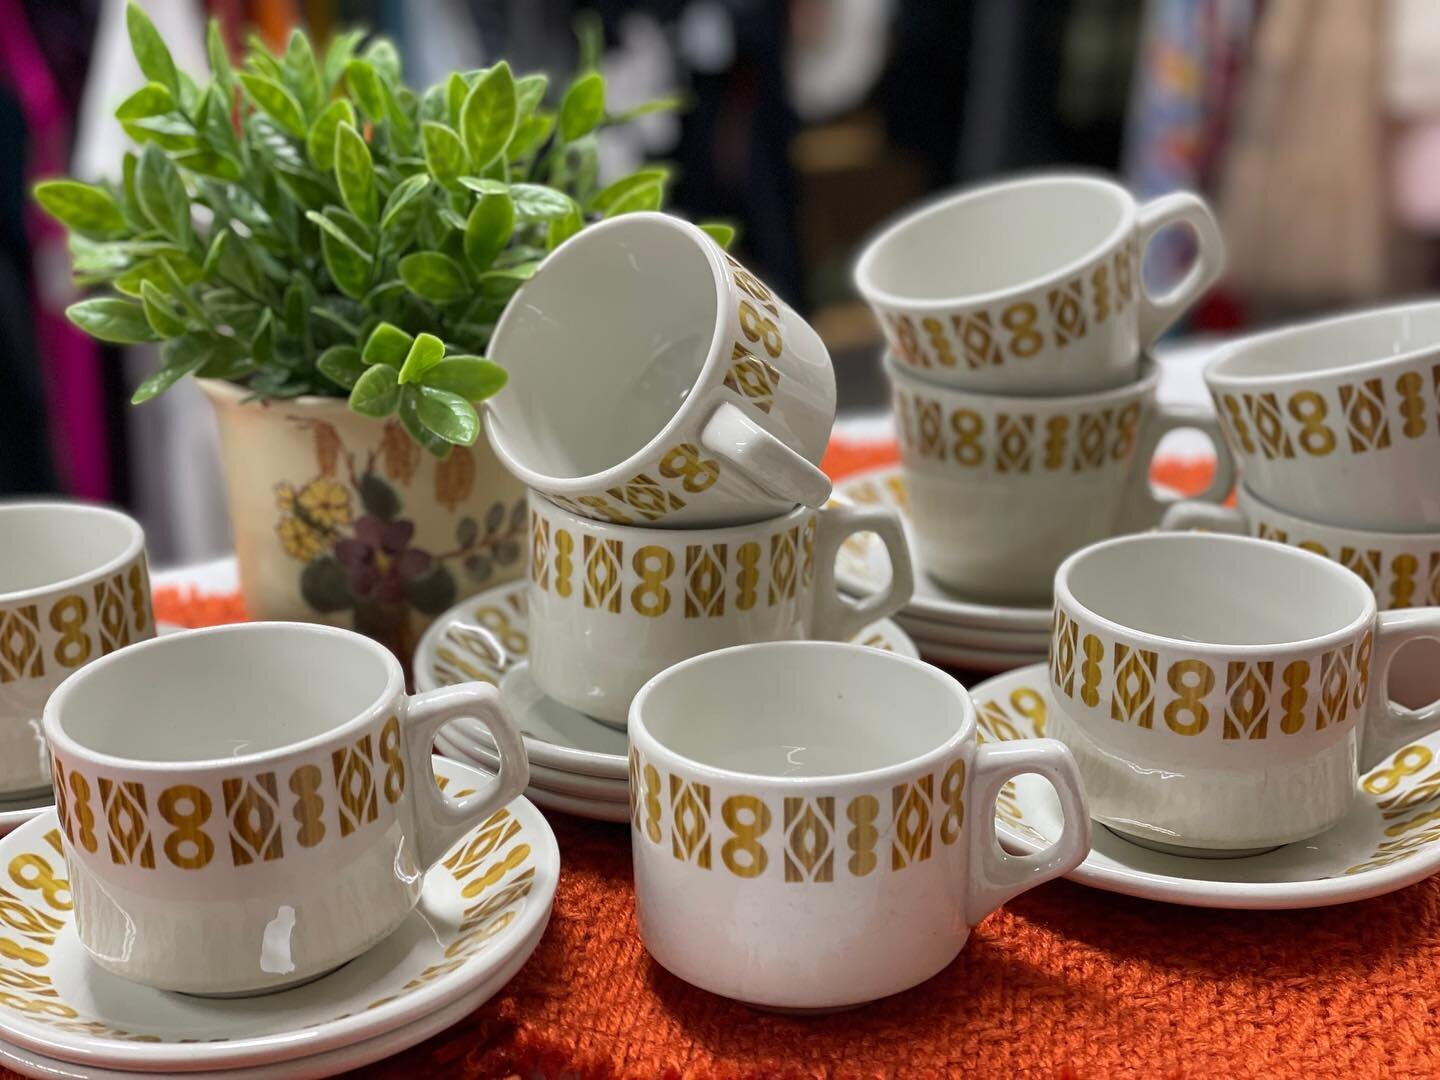 MCM coffee &amp; tea cups. 

#vintage #vintagehome #sustainable #preloved #instagram #homedesign #homedecor #decor #thrift #yyc #yycliving #yycnow #yyctoday #yyclocal #yycevents #yyclife #yycbuzz #yycbusiness #yychomes #calgary #calgaryliving #calgar